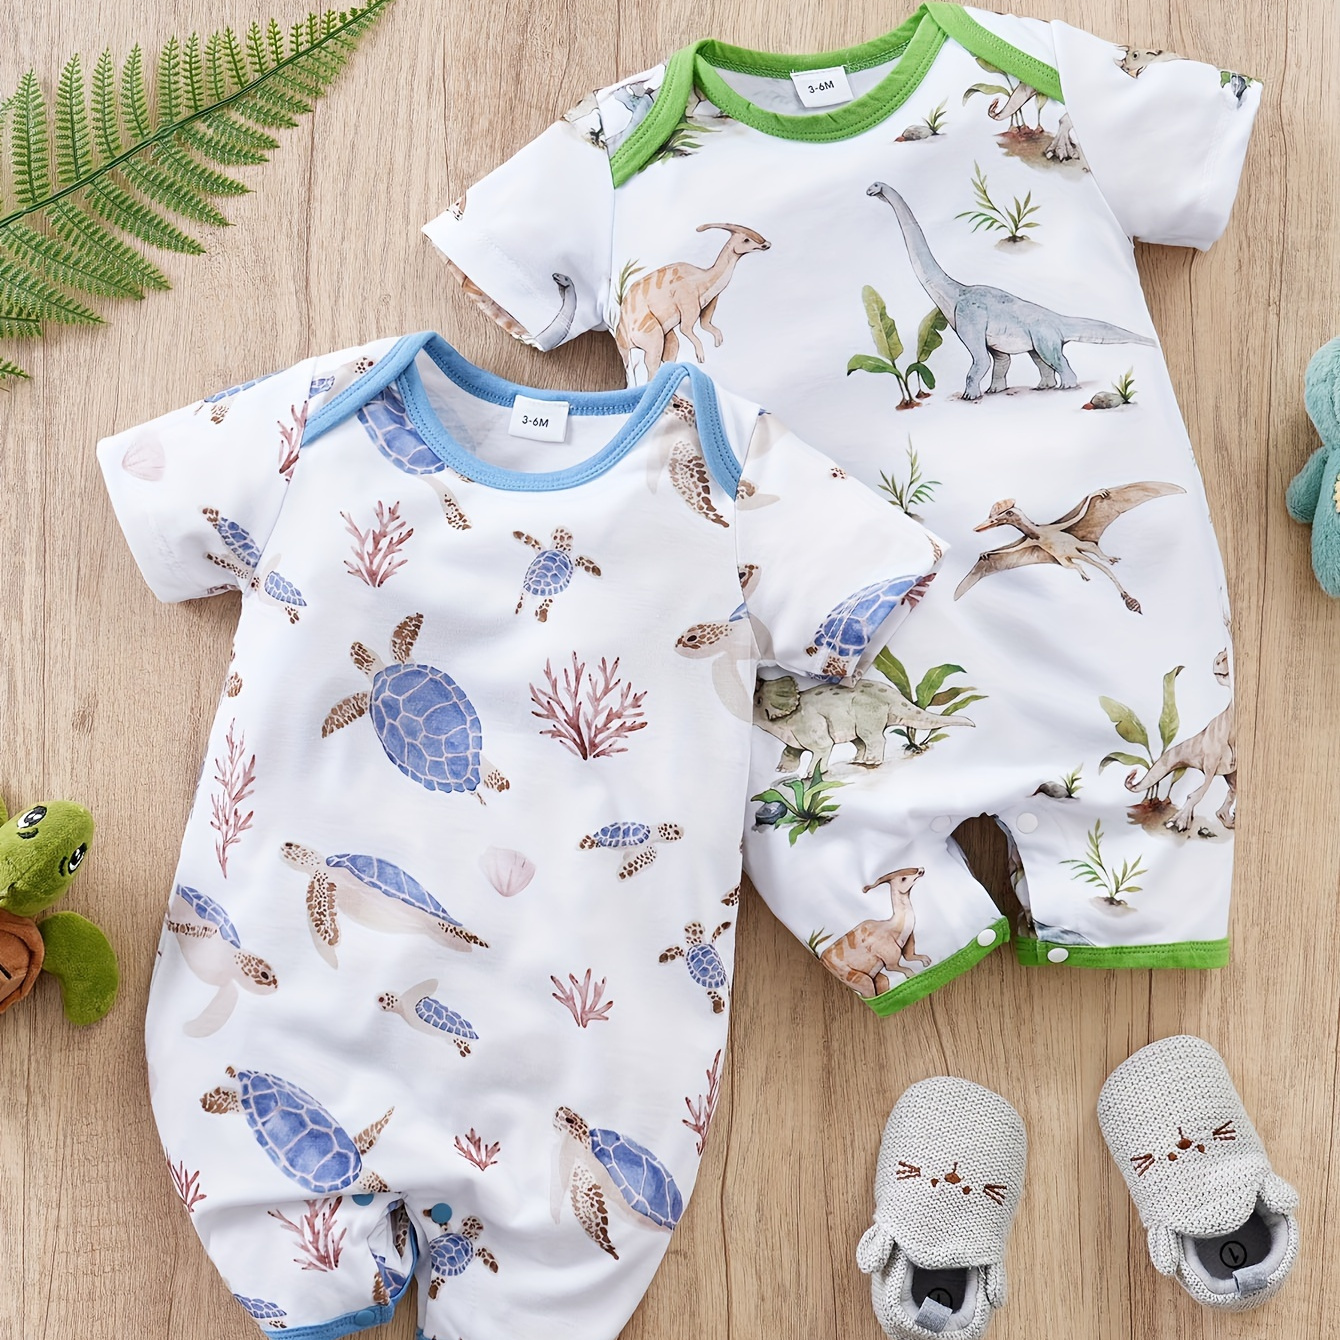 

2-pack Baby Boys Rompers With Cute Turtle & Dinosaur Prints, Summer Casual Short Sleeve Onesies, Adorable Infant Bodysuits